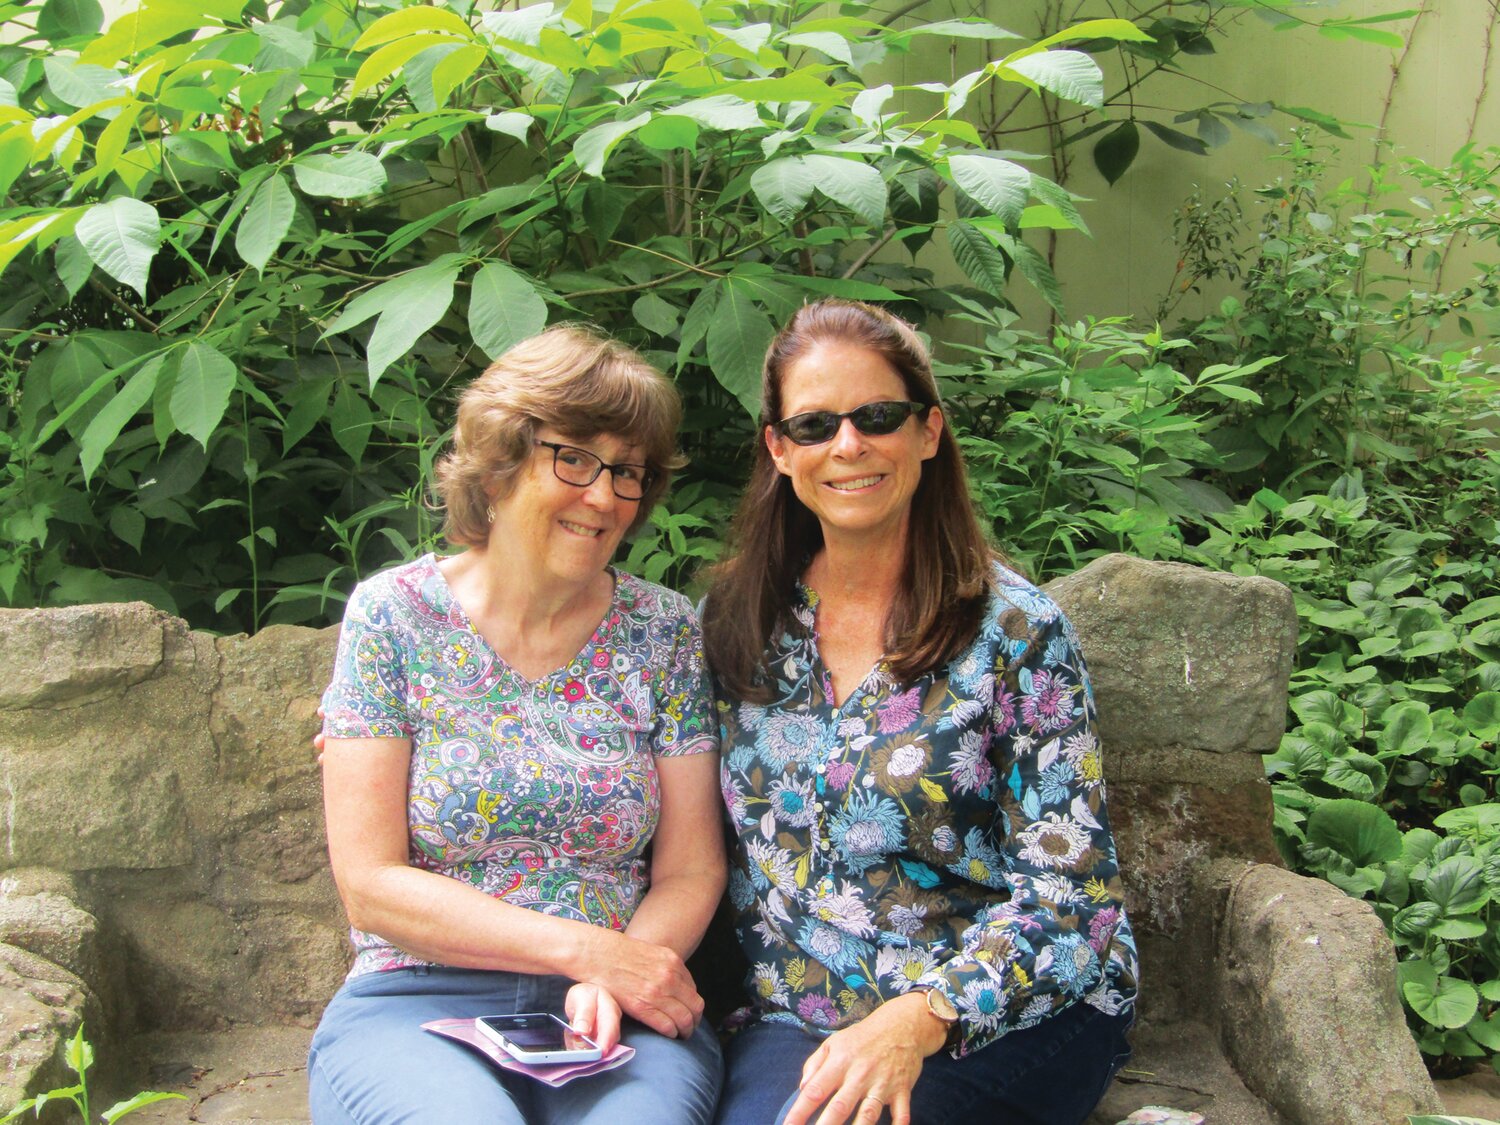 Cindy Nuss and Heidi Shiver in the Winters garden.